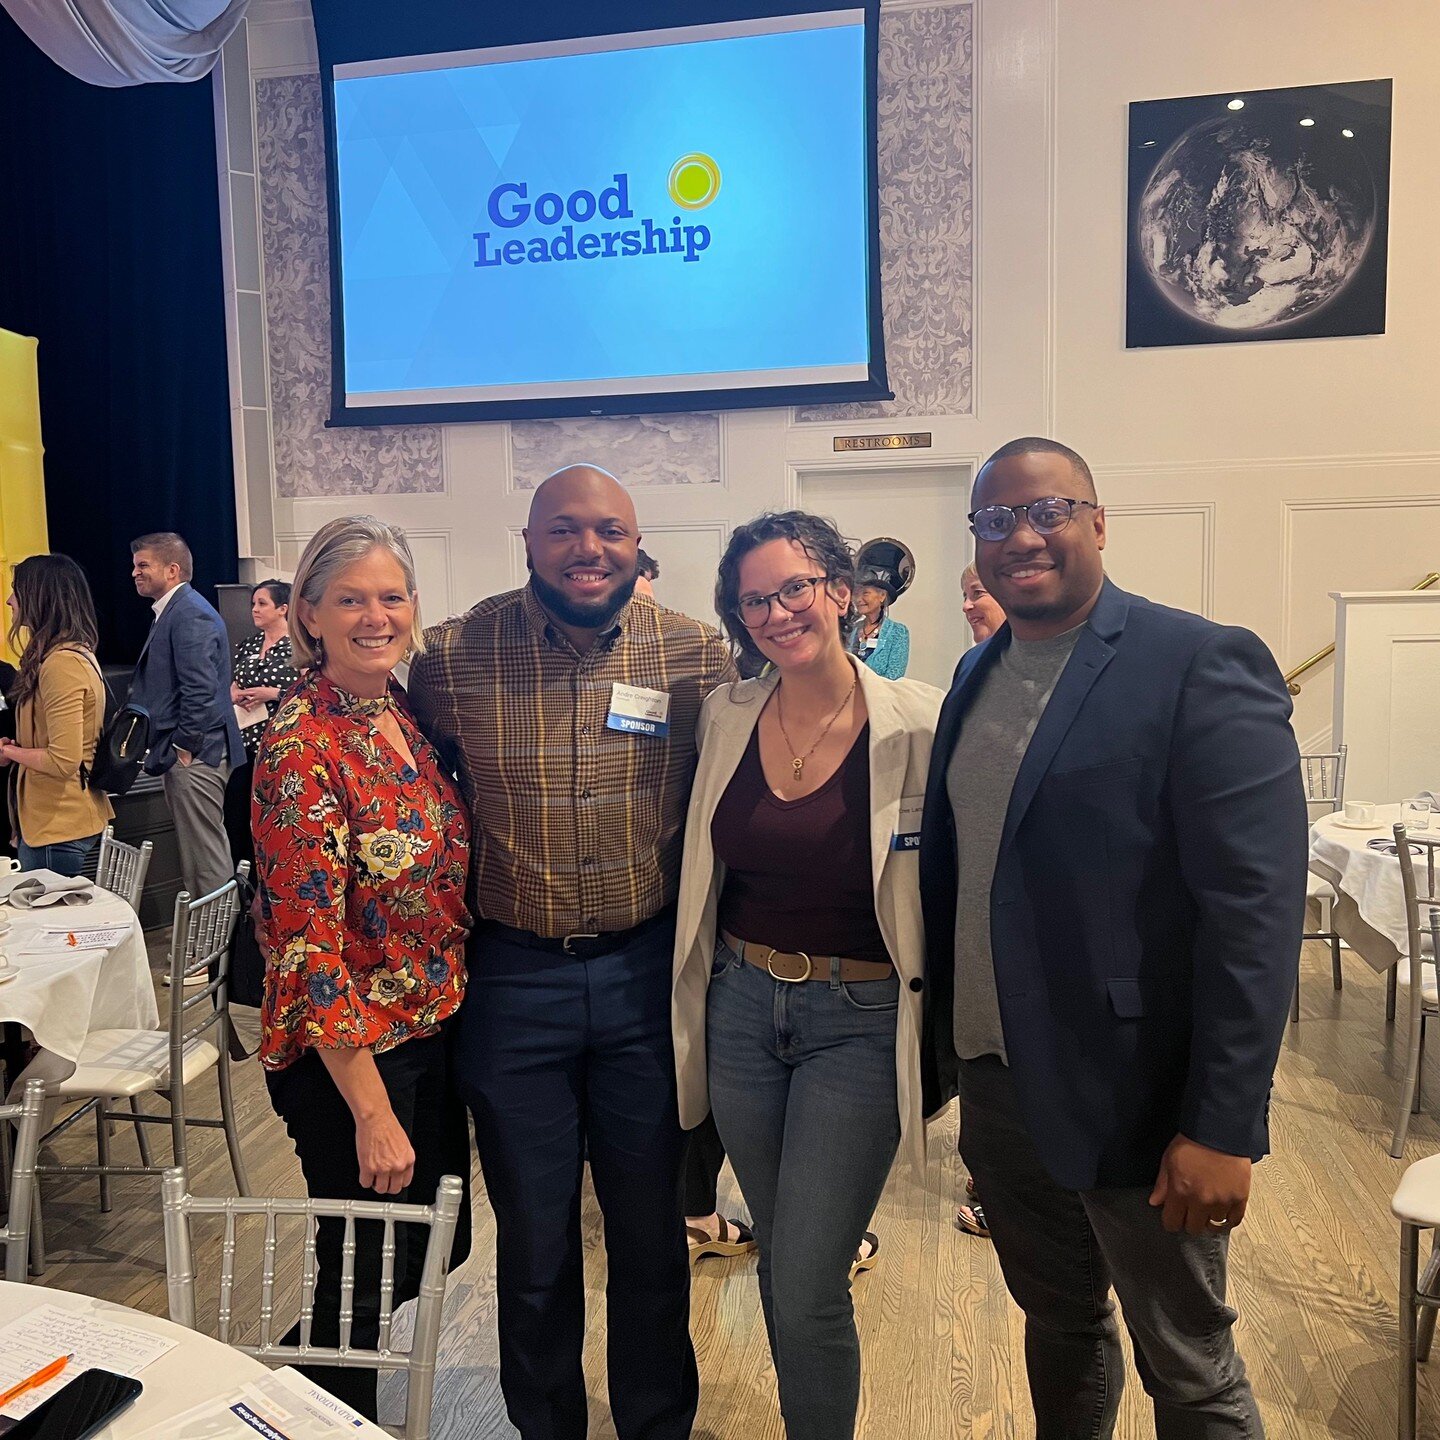 This morning the TurnSignl team got up bright and early to join the MMA Team &mdash; Suzy Kuhlmann, Lilly Hartman and Dan Kuhlmann for a &quot;Good Leadership Breakfast&quot;, to learn what drives positive, successful leadership, and how to continue 